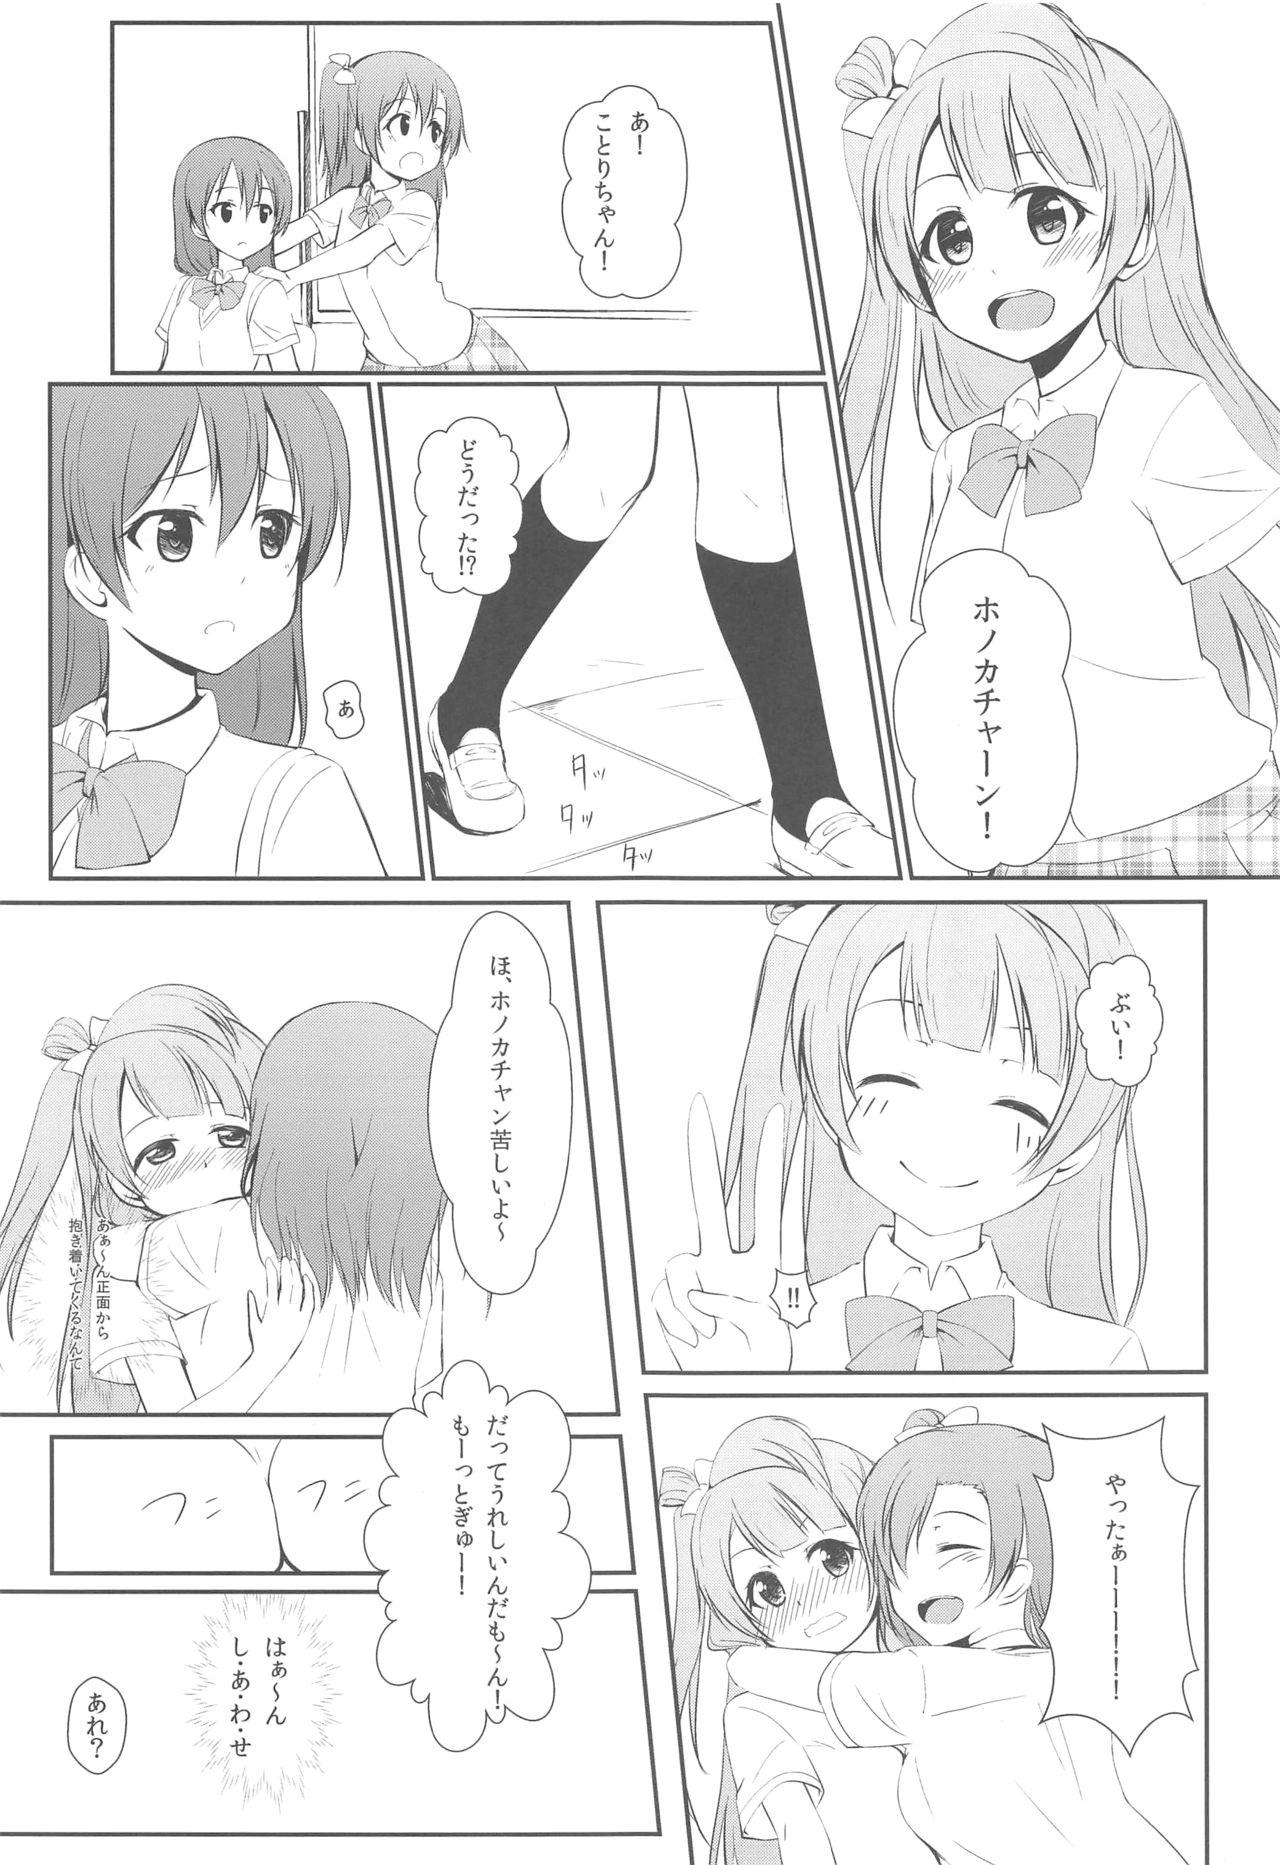 3some UNBALANCED LOVE. - Love live Outdoor - Page 6